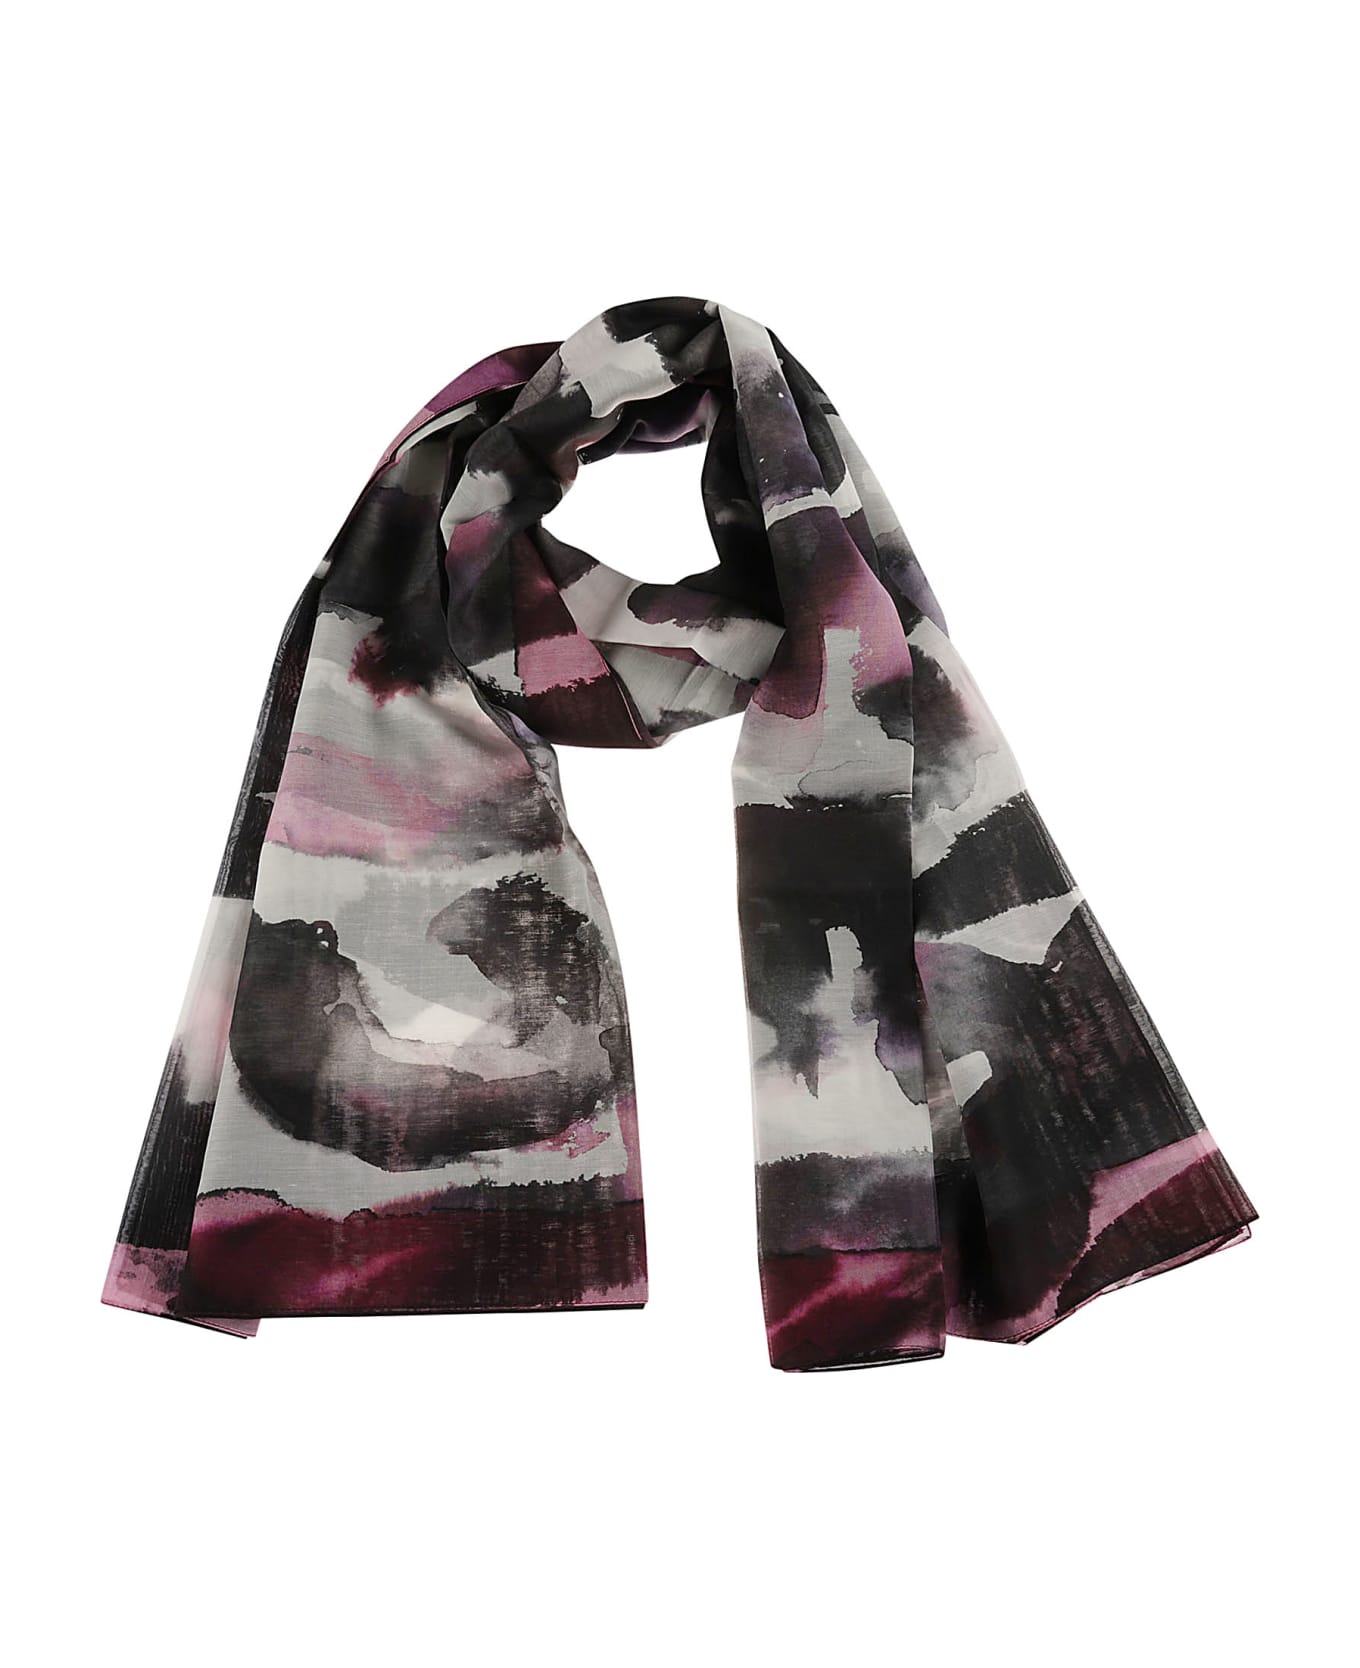 Alexander McQueen Printed All-over Scarf - Pink/Black